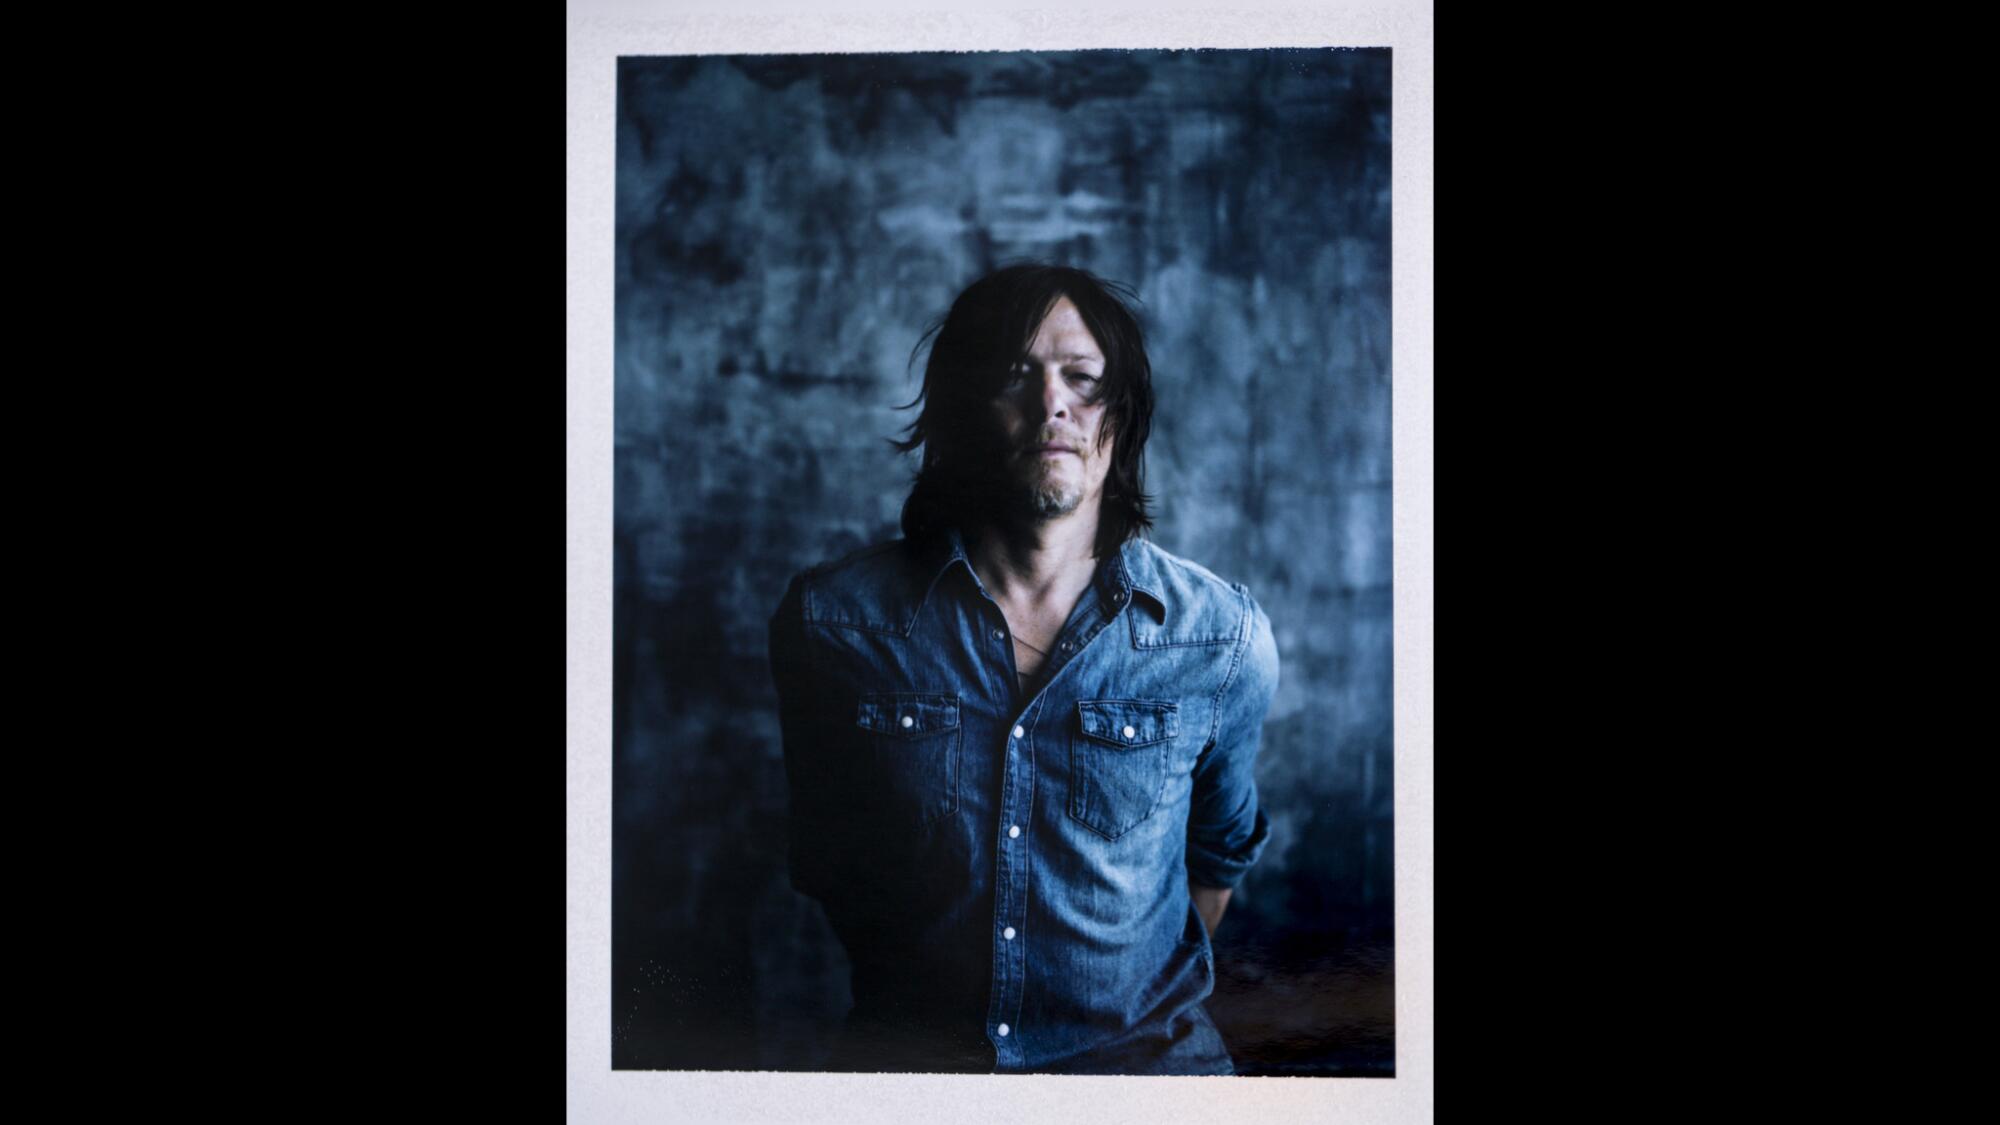 Norman Reedus from "The Walking Dead" and upcoming sci-fi movie "Air," photographed at Comic-Con 2015.